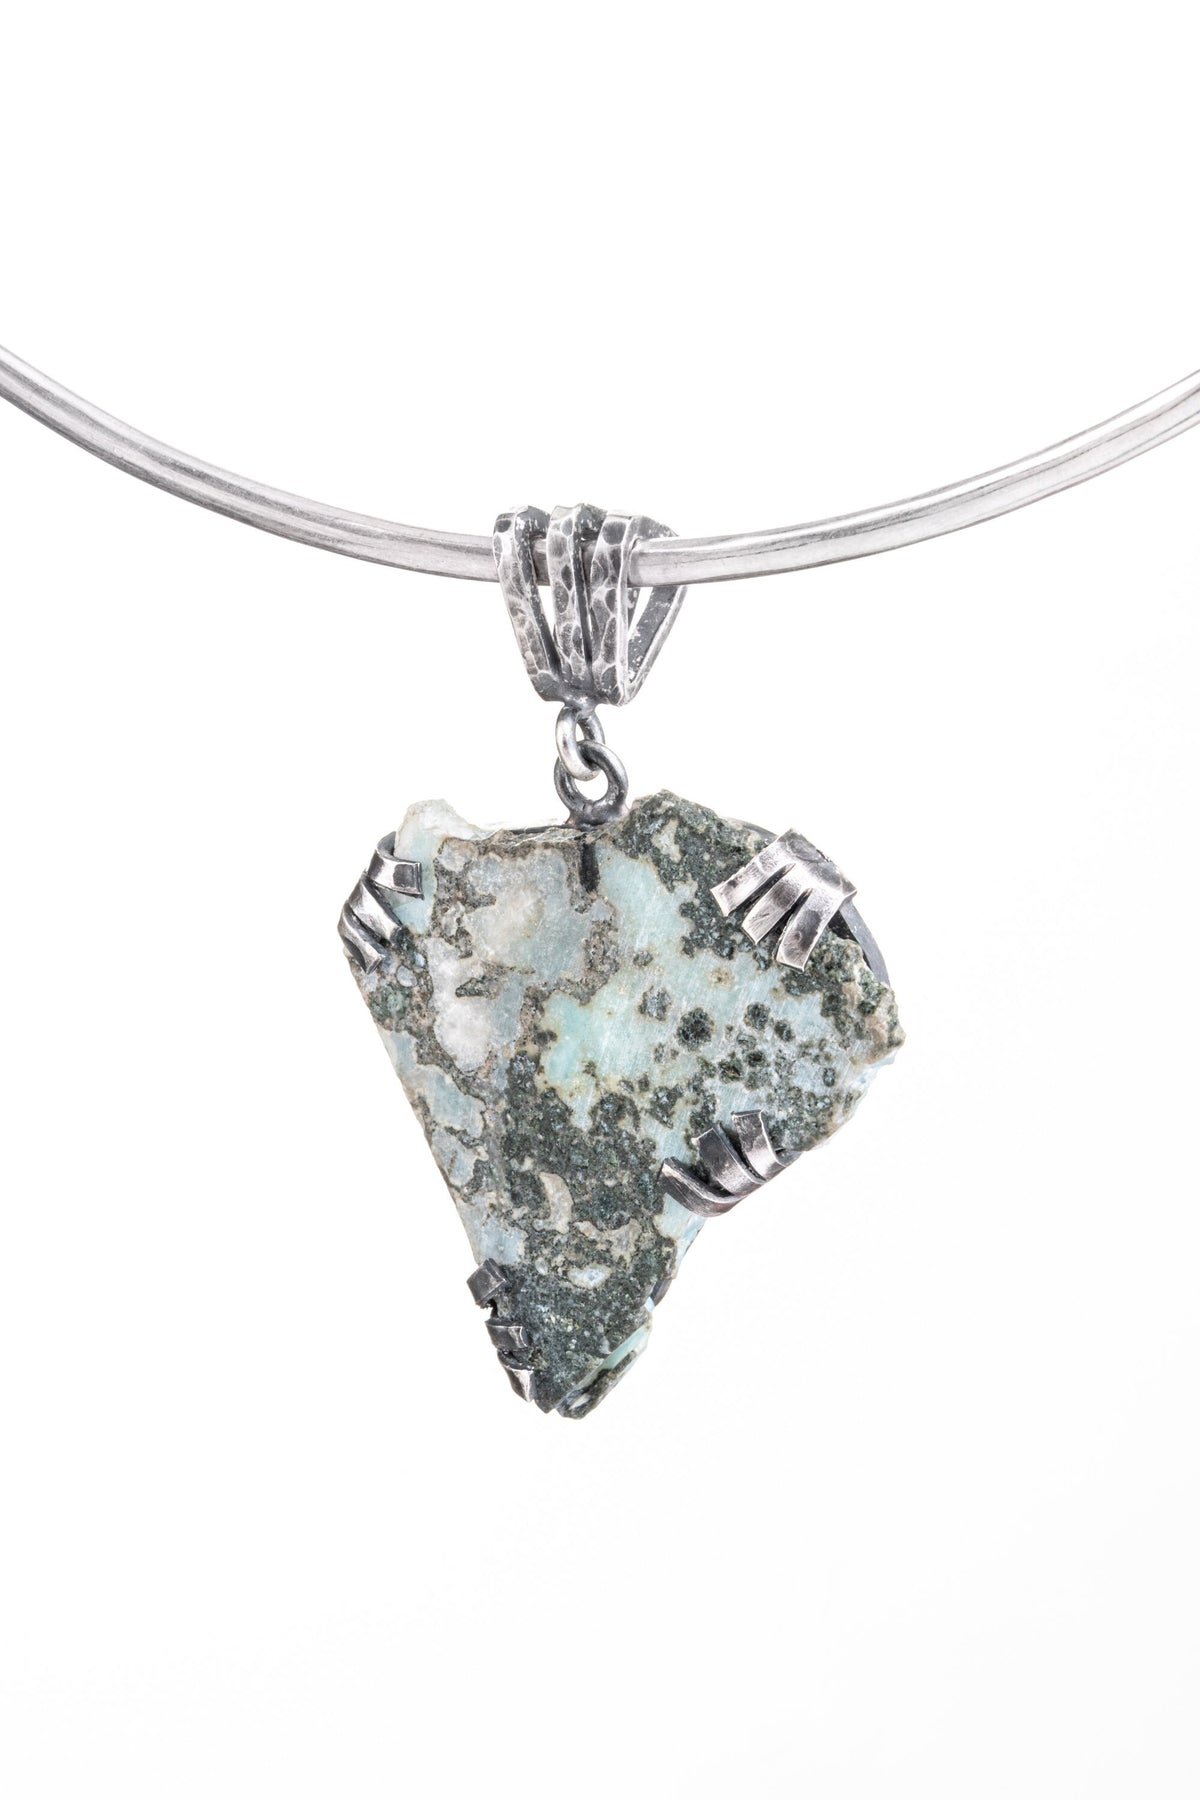 Large Natural unpolished Larimar - 925 Sterling Silver - Hammered & Oxidised - Three Claw Wire Setting - Pendant Neckpiece N/11